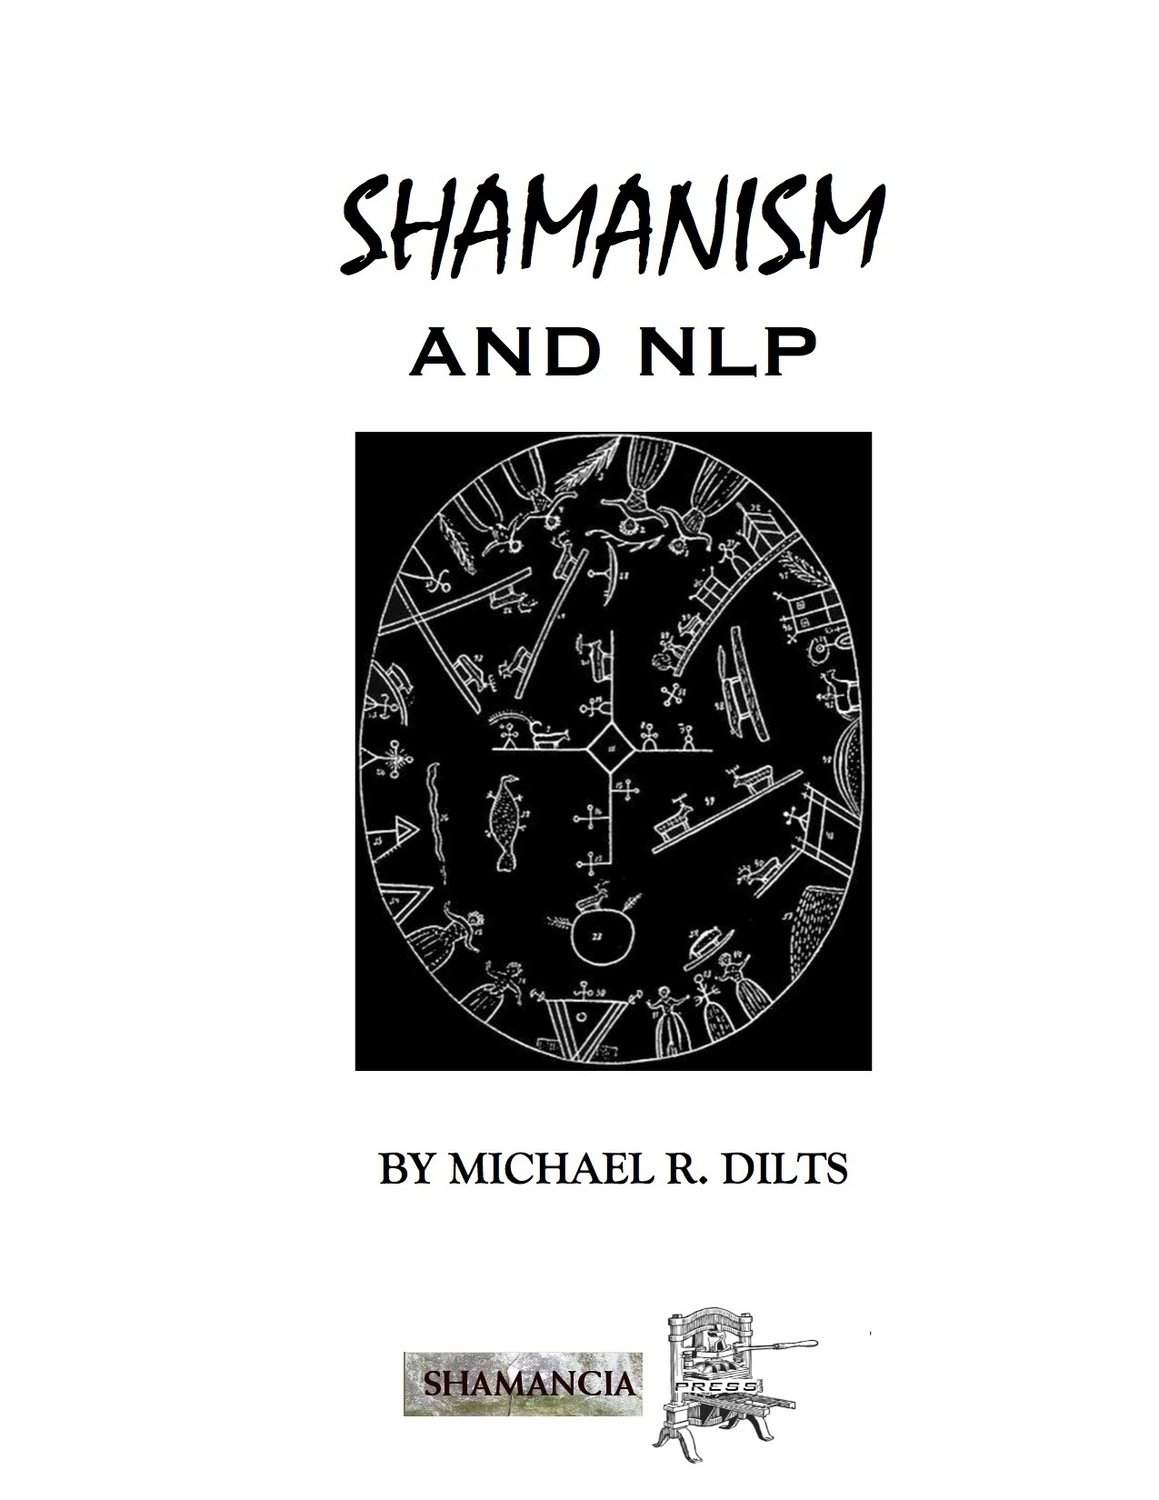 Shamanism and NLP by Michael R. Dilts [Booklet]